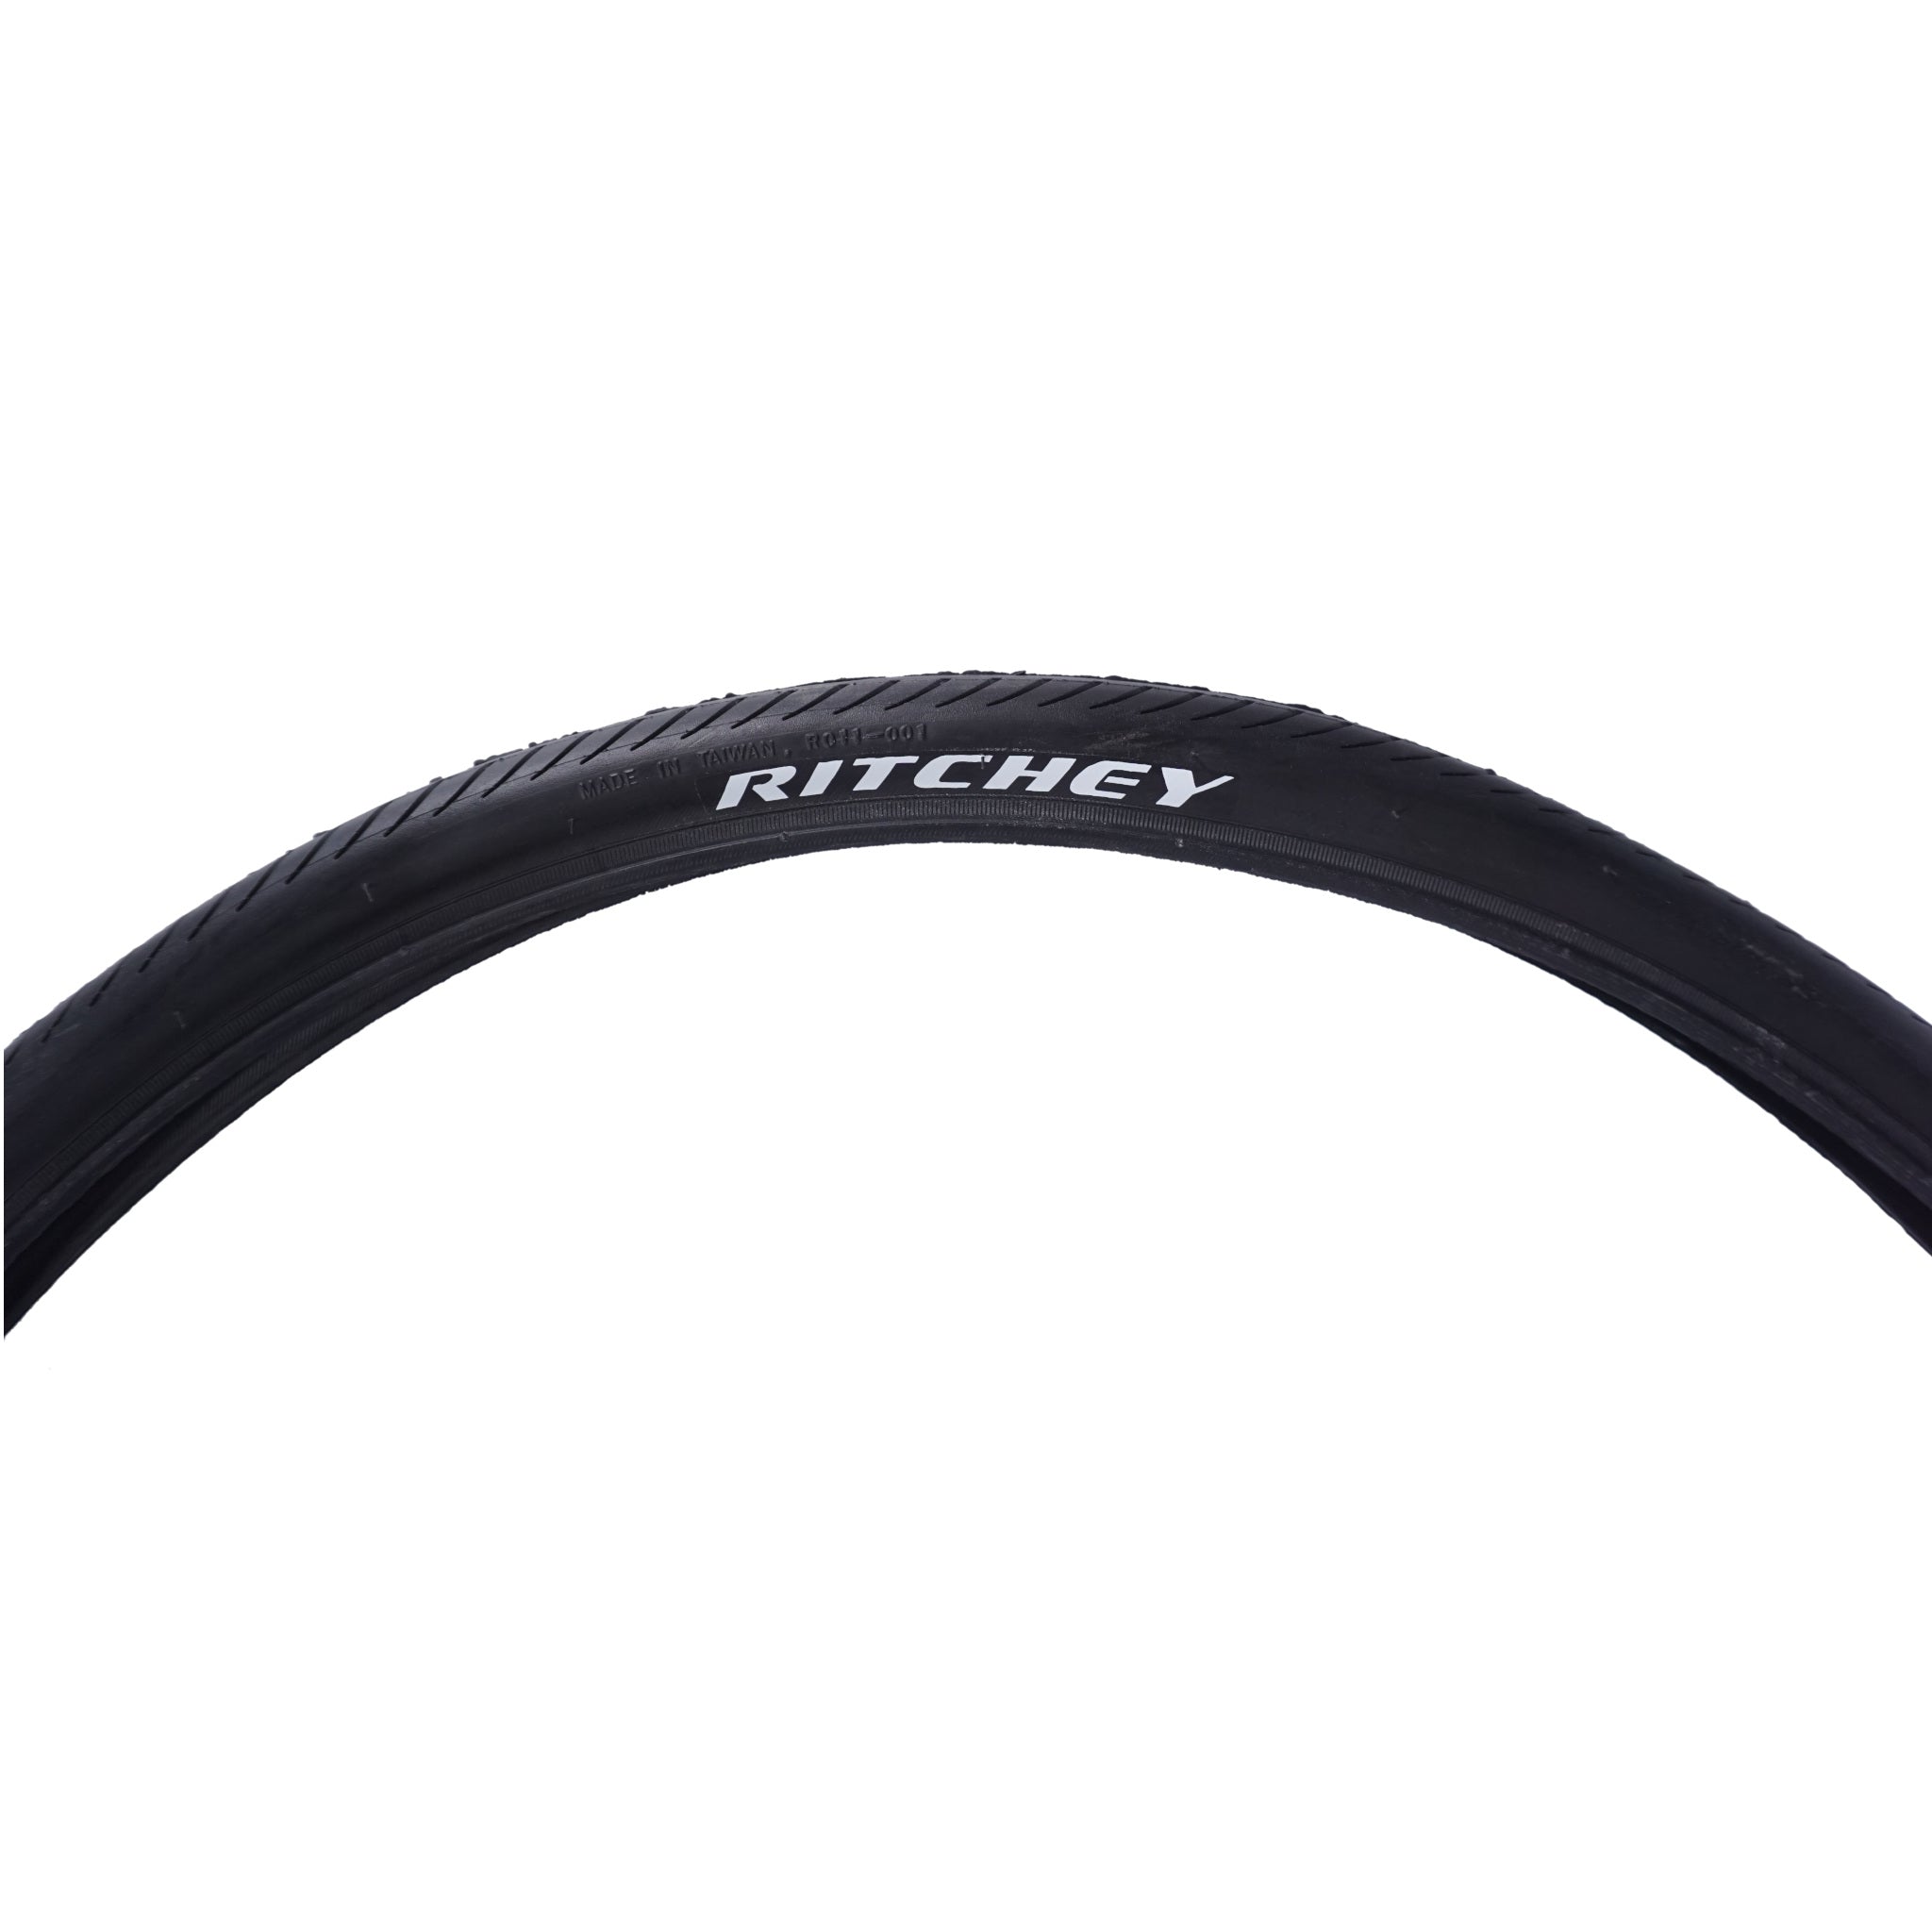 Ritchey Tom Slick 26-inch Street and Path tire - The Bikesmiths